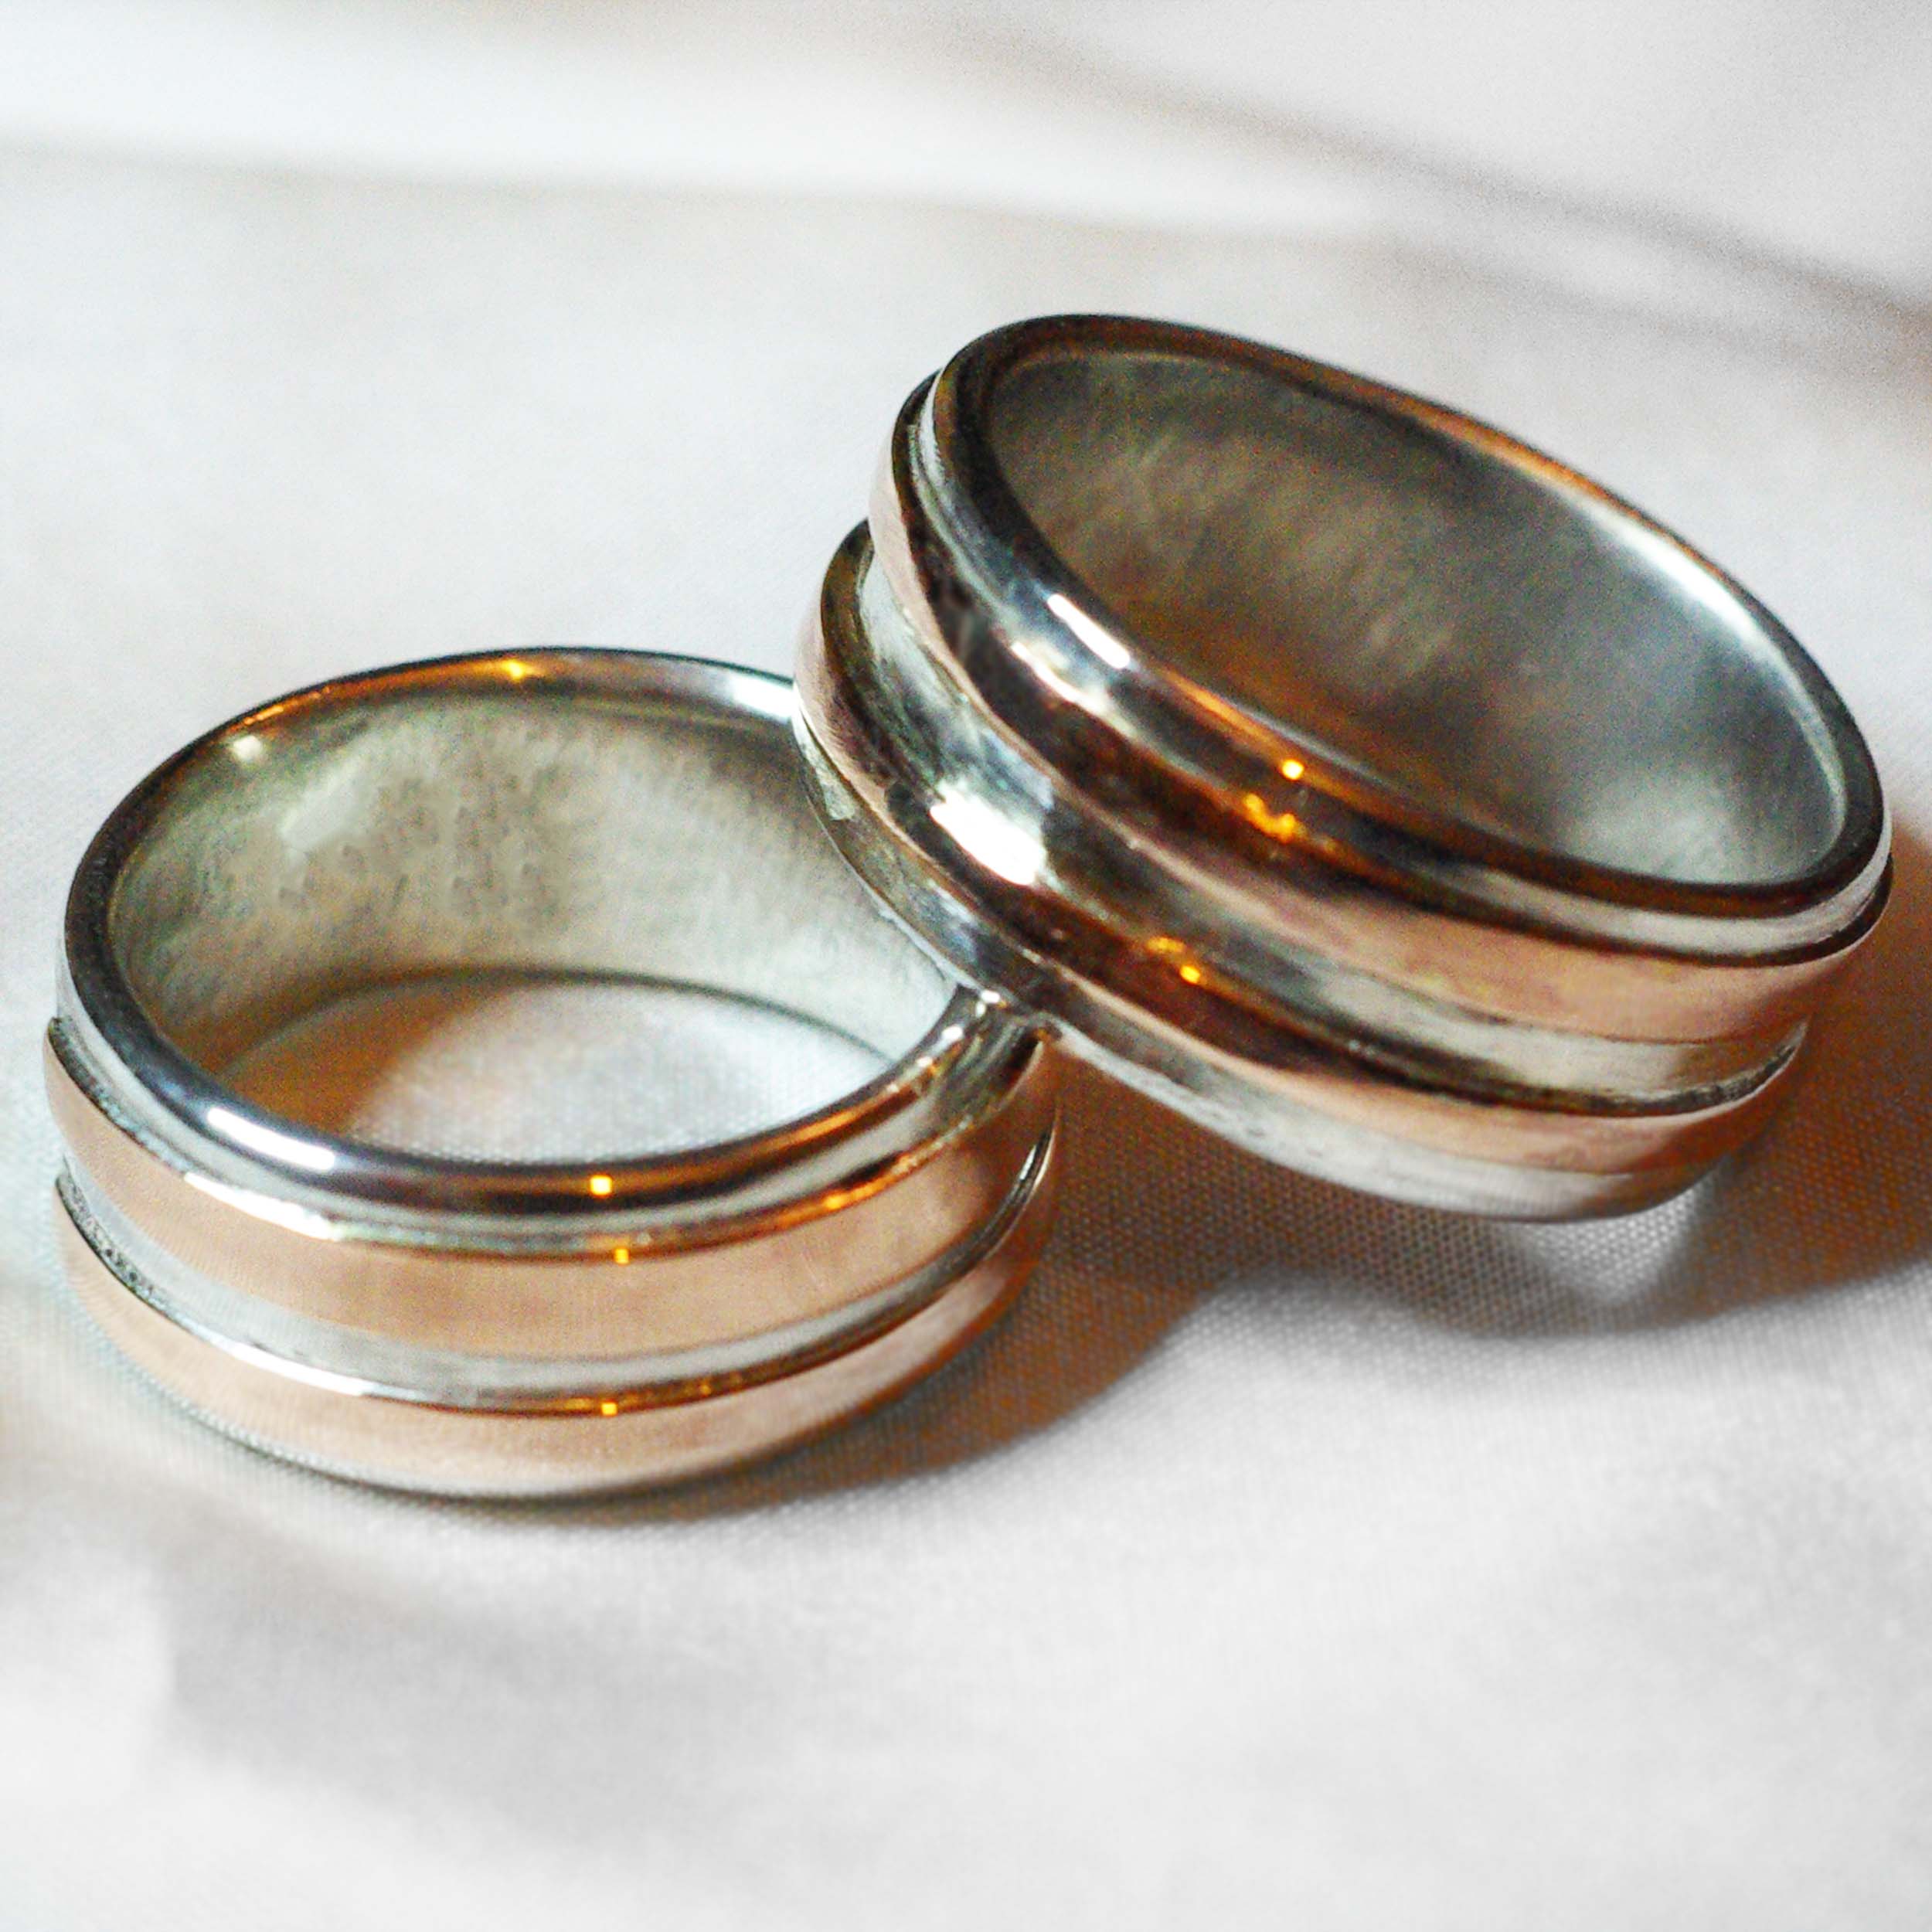 From Something Old, Something New: Non-Traditional Engagement Rings - Made  by CustomMade